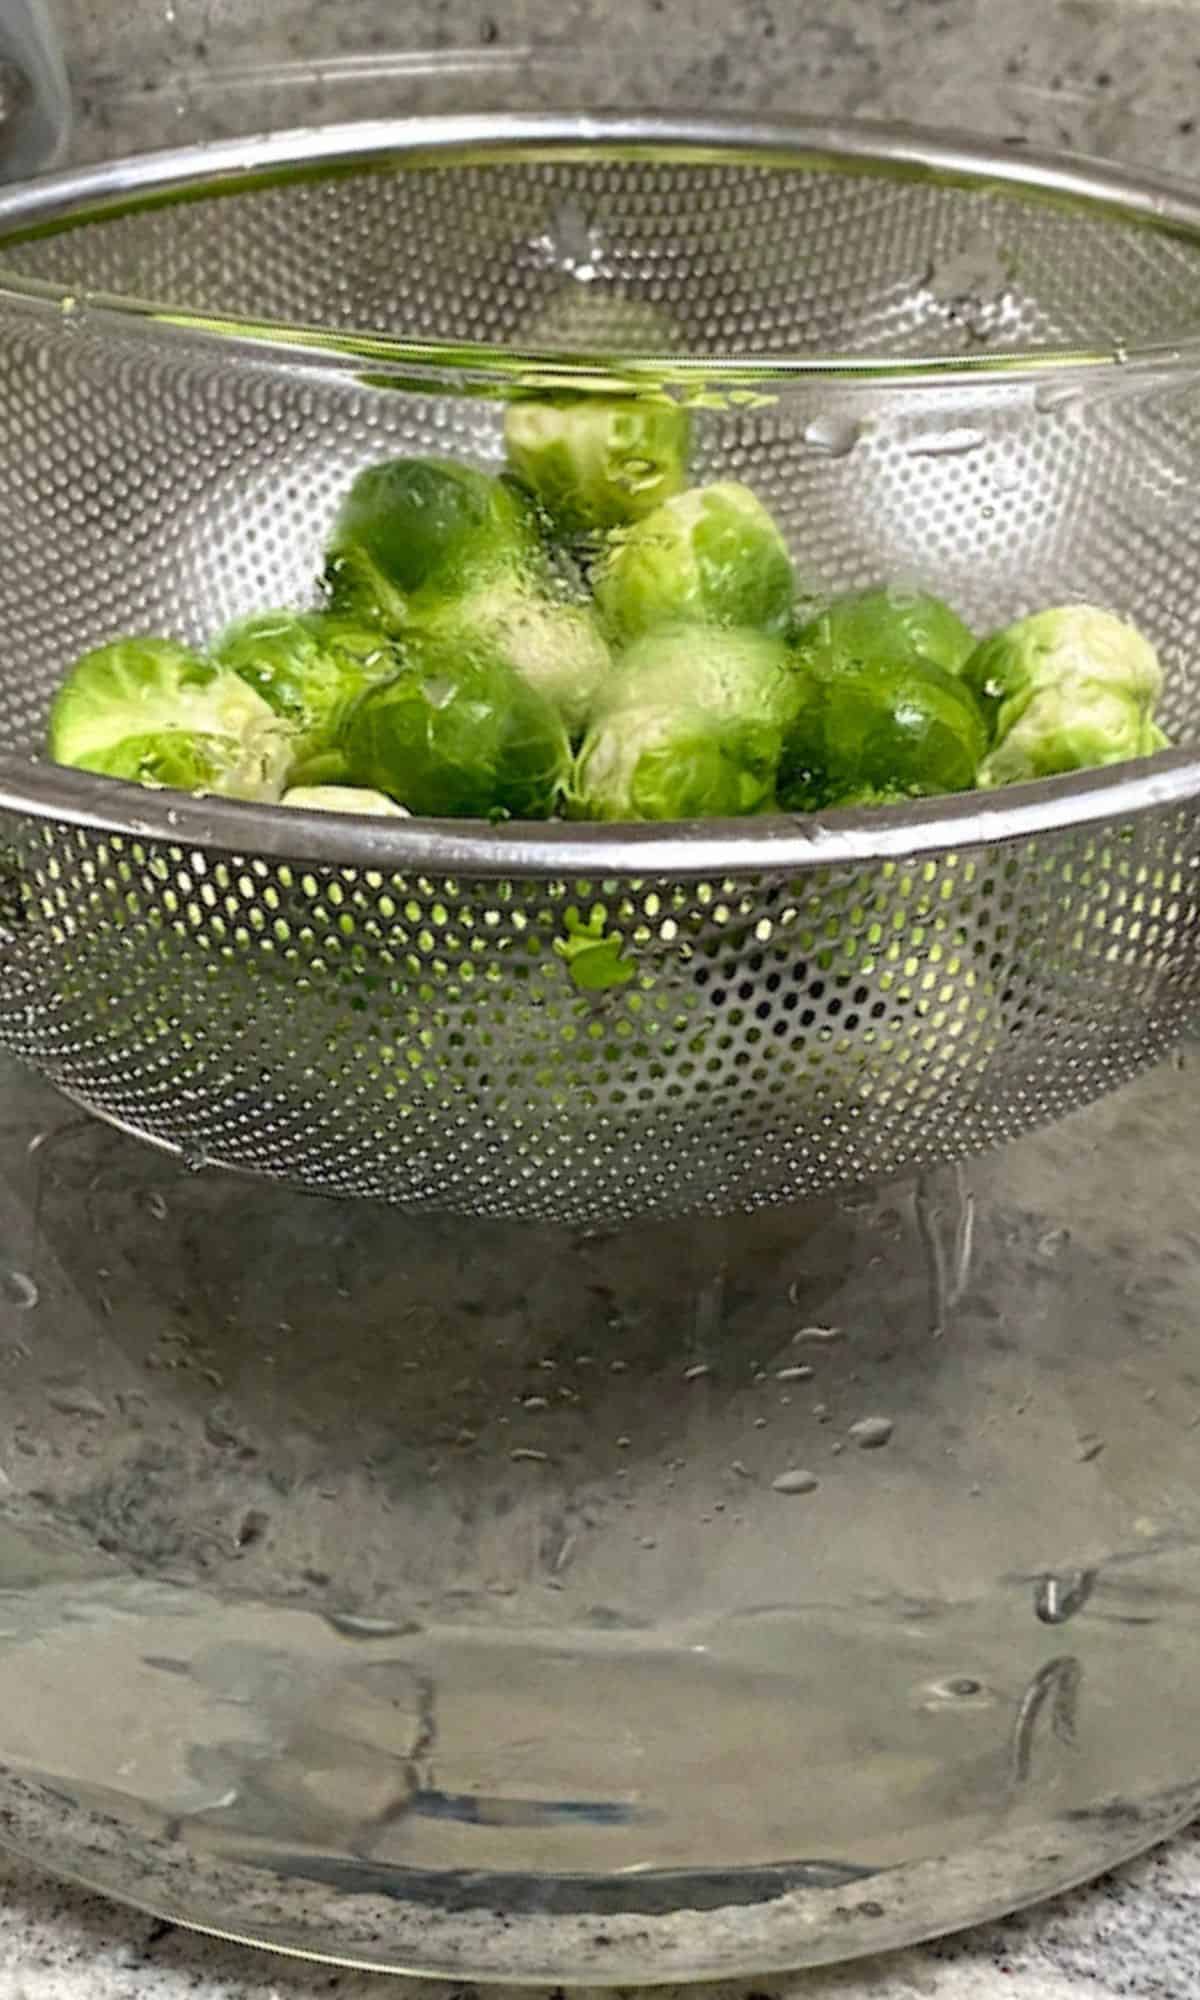 Steaming brussels sprouts